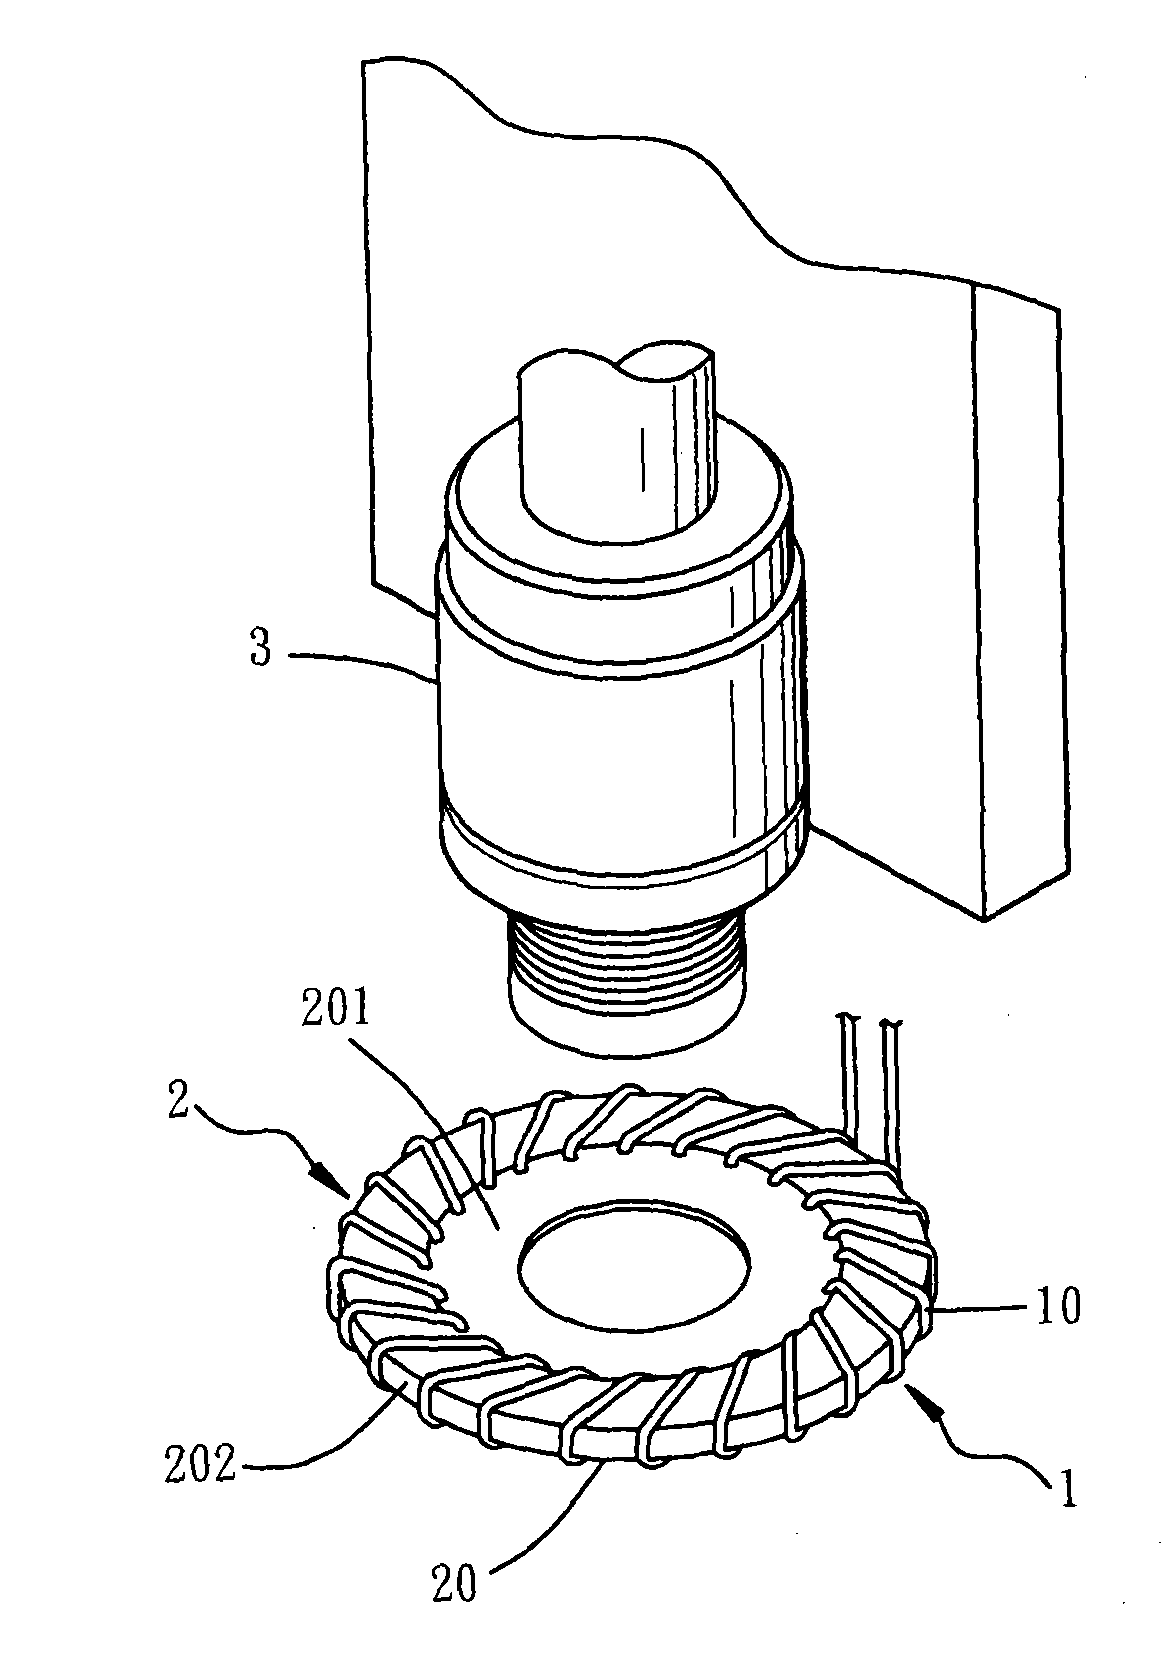 Signal device of error action anti-collision detector for machine table or equipment working head